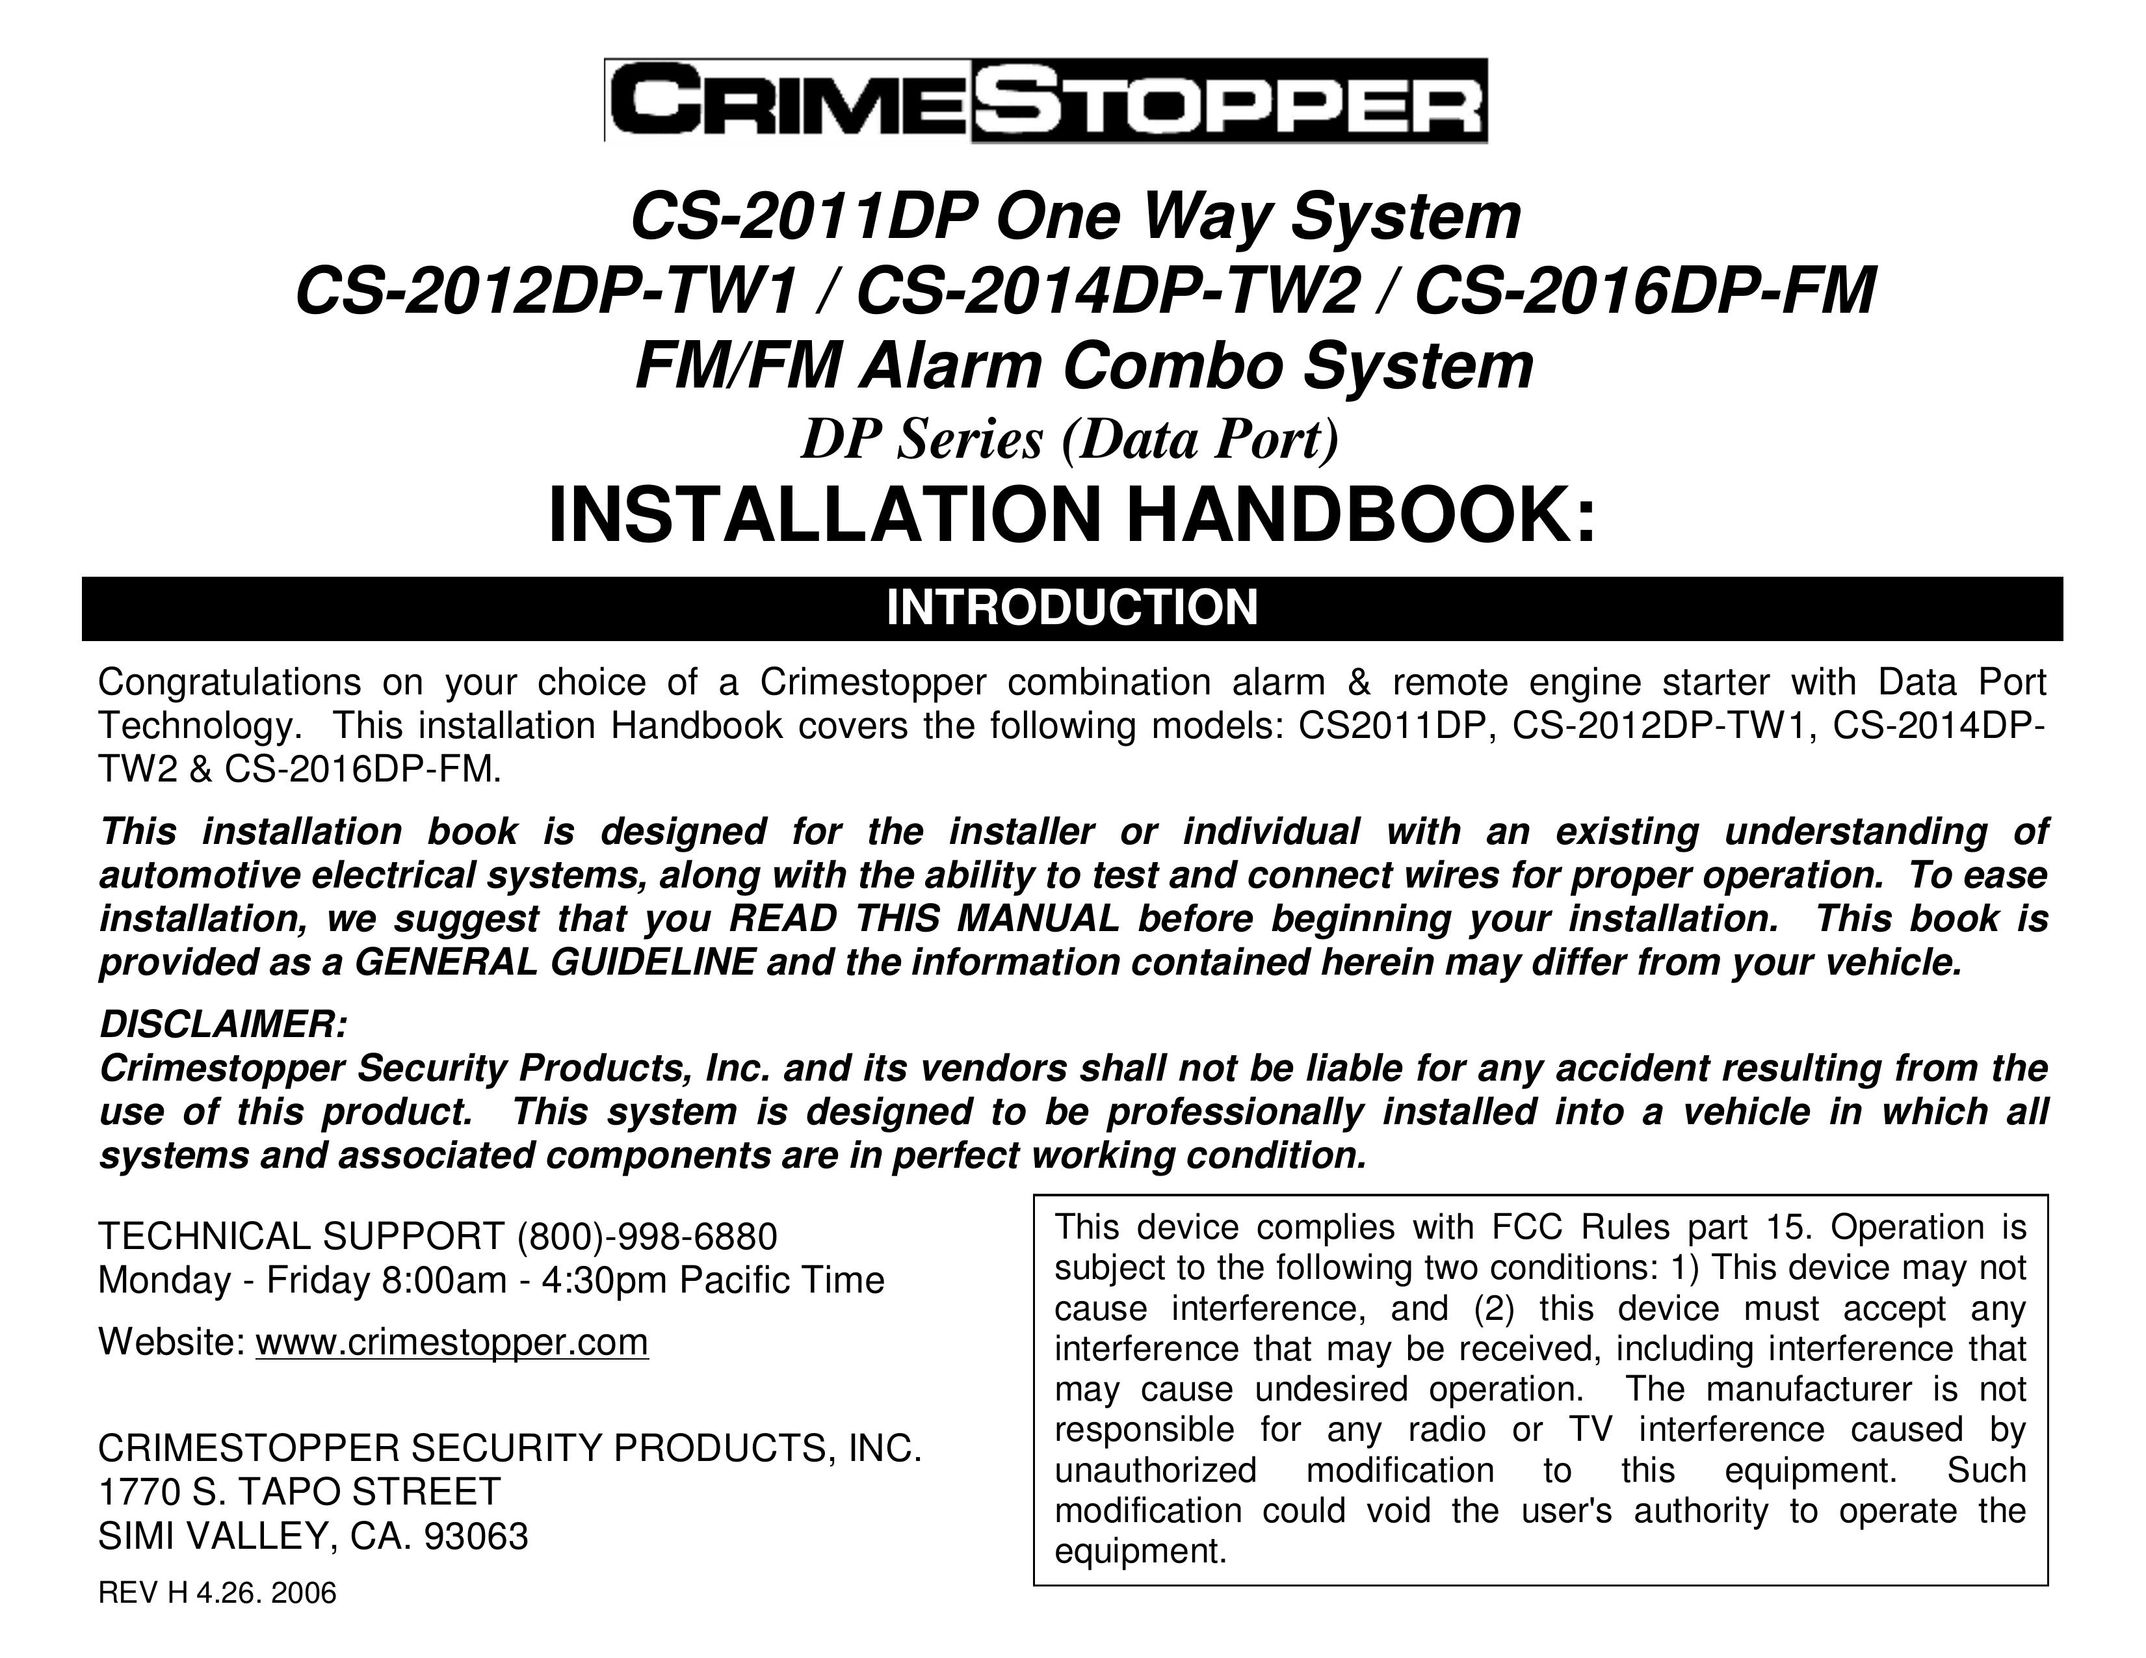 Crimestopper Security Products CS-2011DP Car Video System User Manual